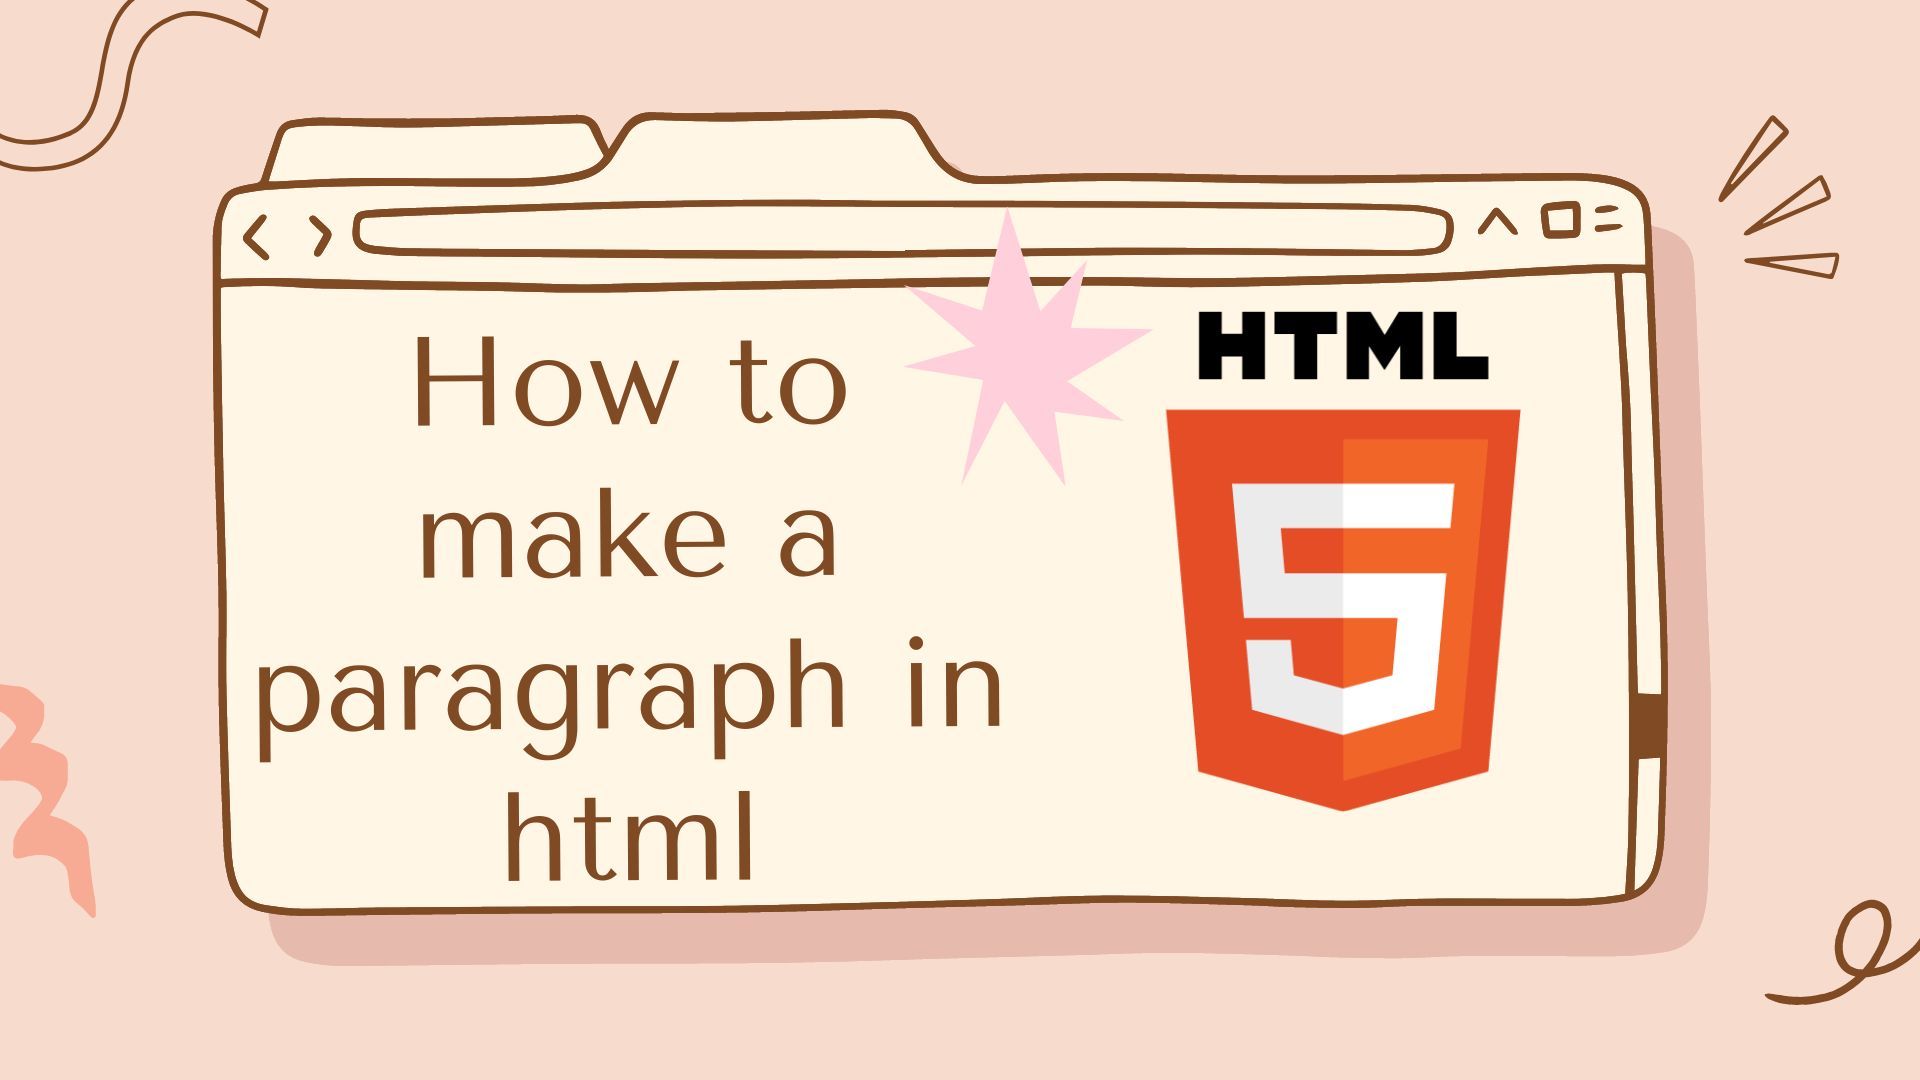 How To Write A Paragraph In Html?